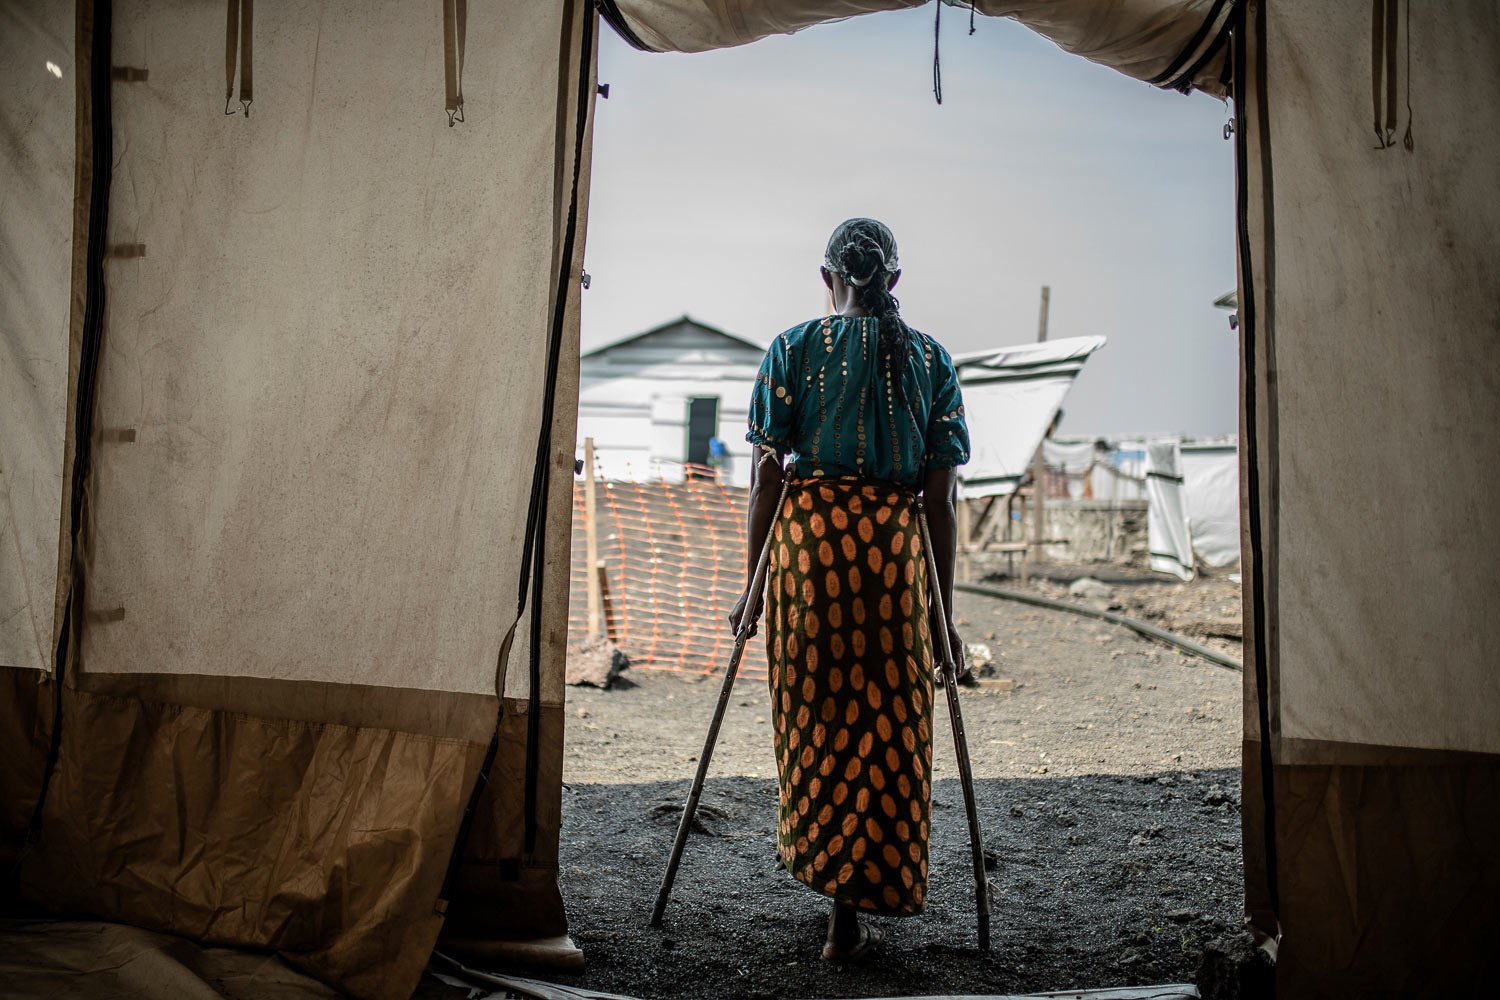  The 42-year-old mother of four who was raped in the Bulengo displacement camp where she had fled war in eastern Congo poses for a photograph Aug. 23, 2023. (AP Photo/Moses Sawasawa) 